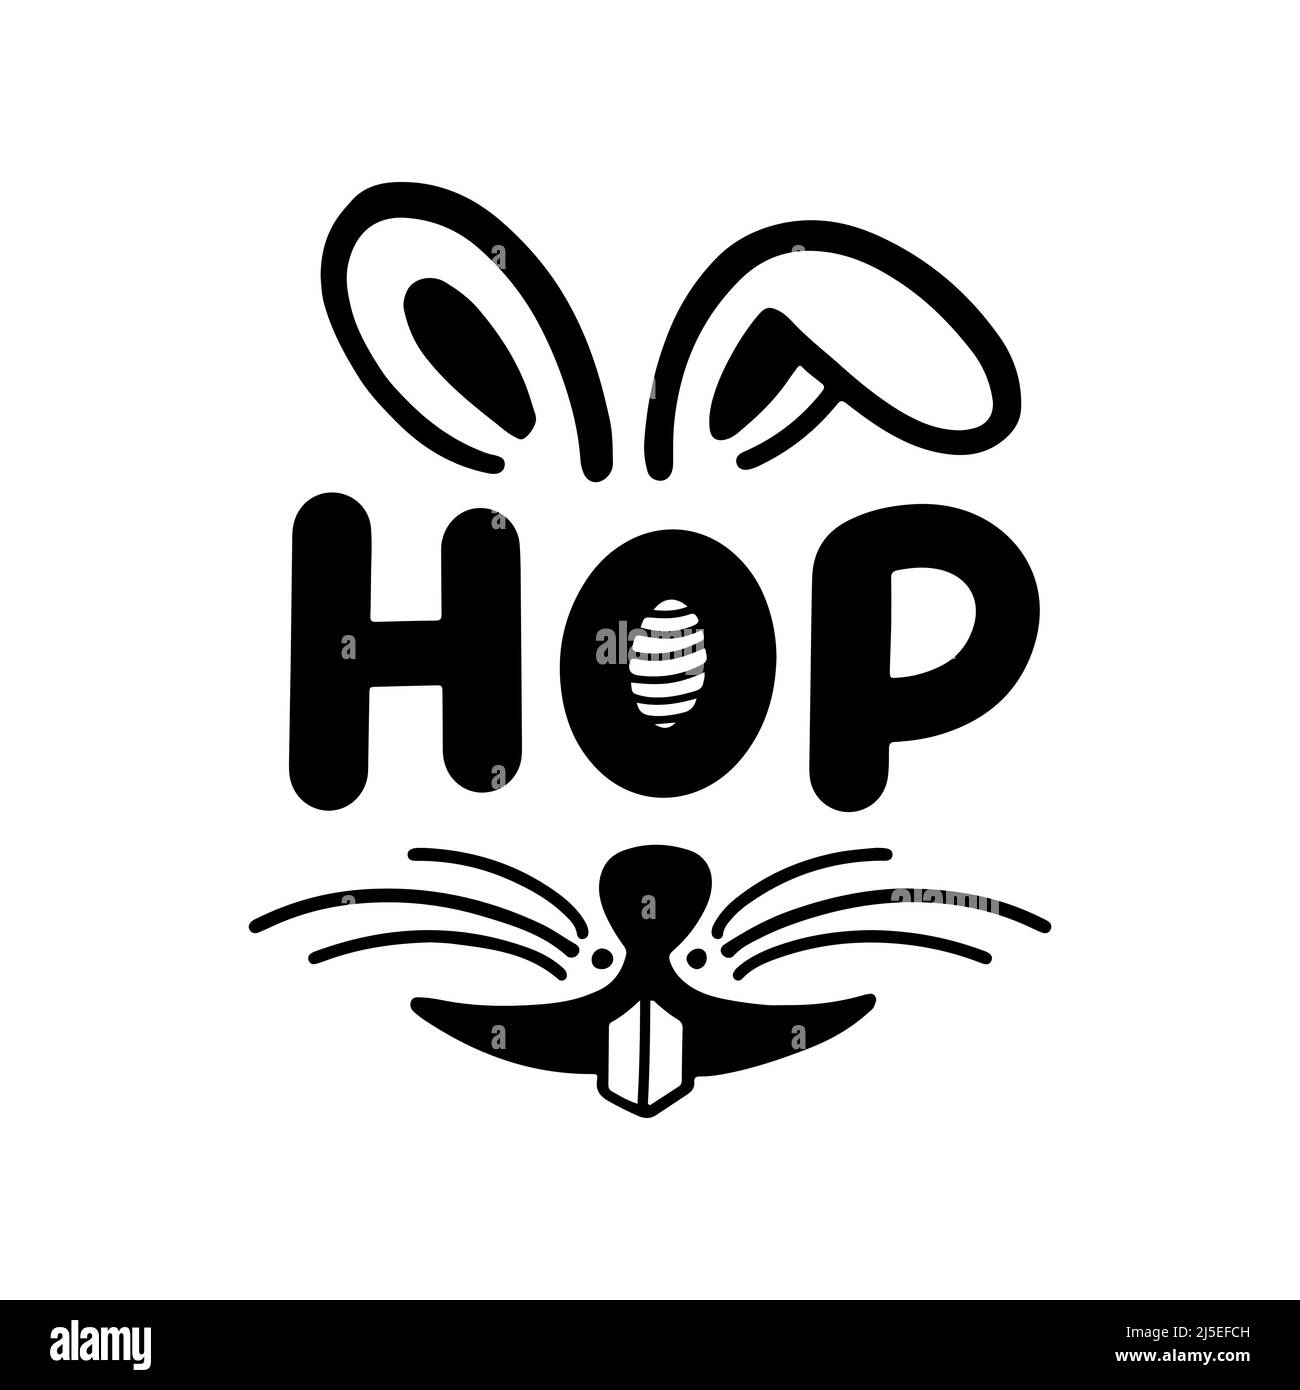 Easter bunny egg hop lettering greeting card. Hand-drawn lettering poster for Easter. Easter hop calligraphy lettering isolated on white background. Stock Vector